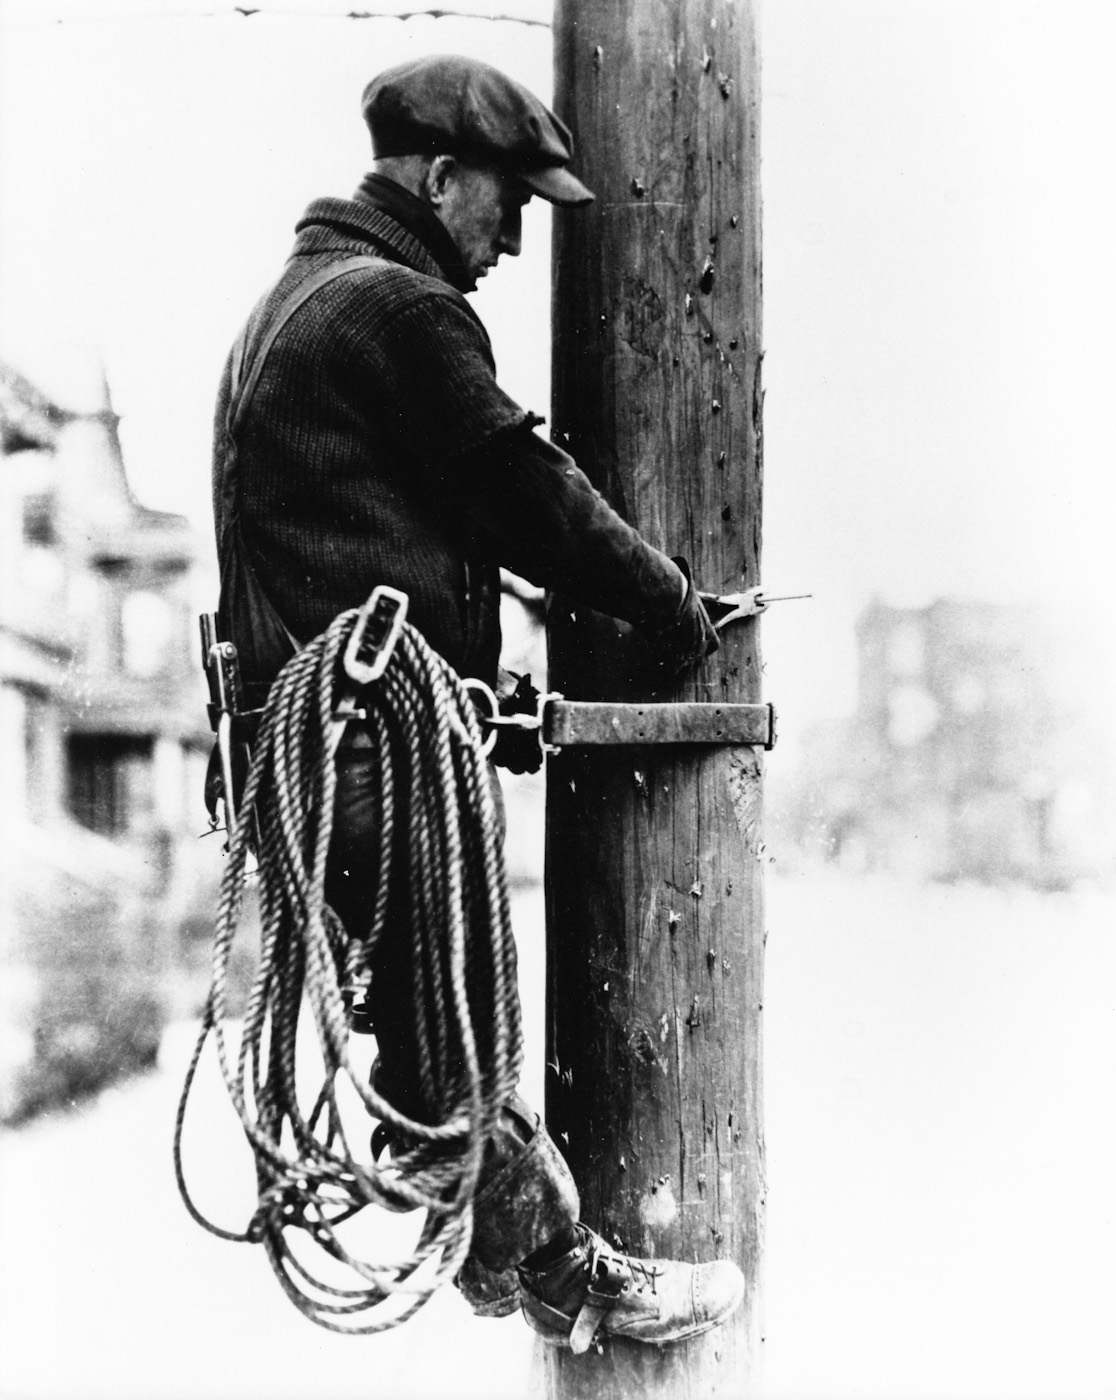 A telephone lineman works on a pole. Location and date unknown. View full size.